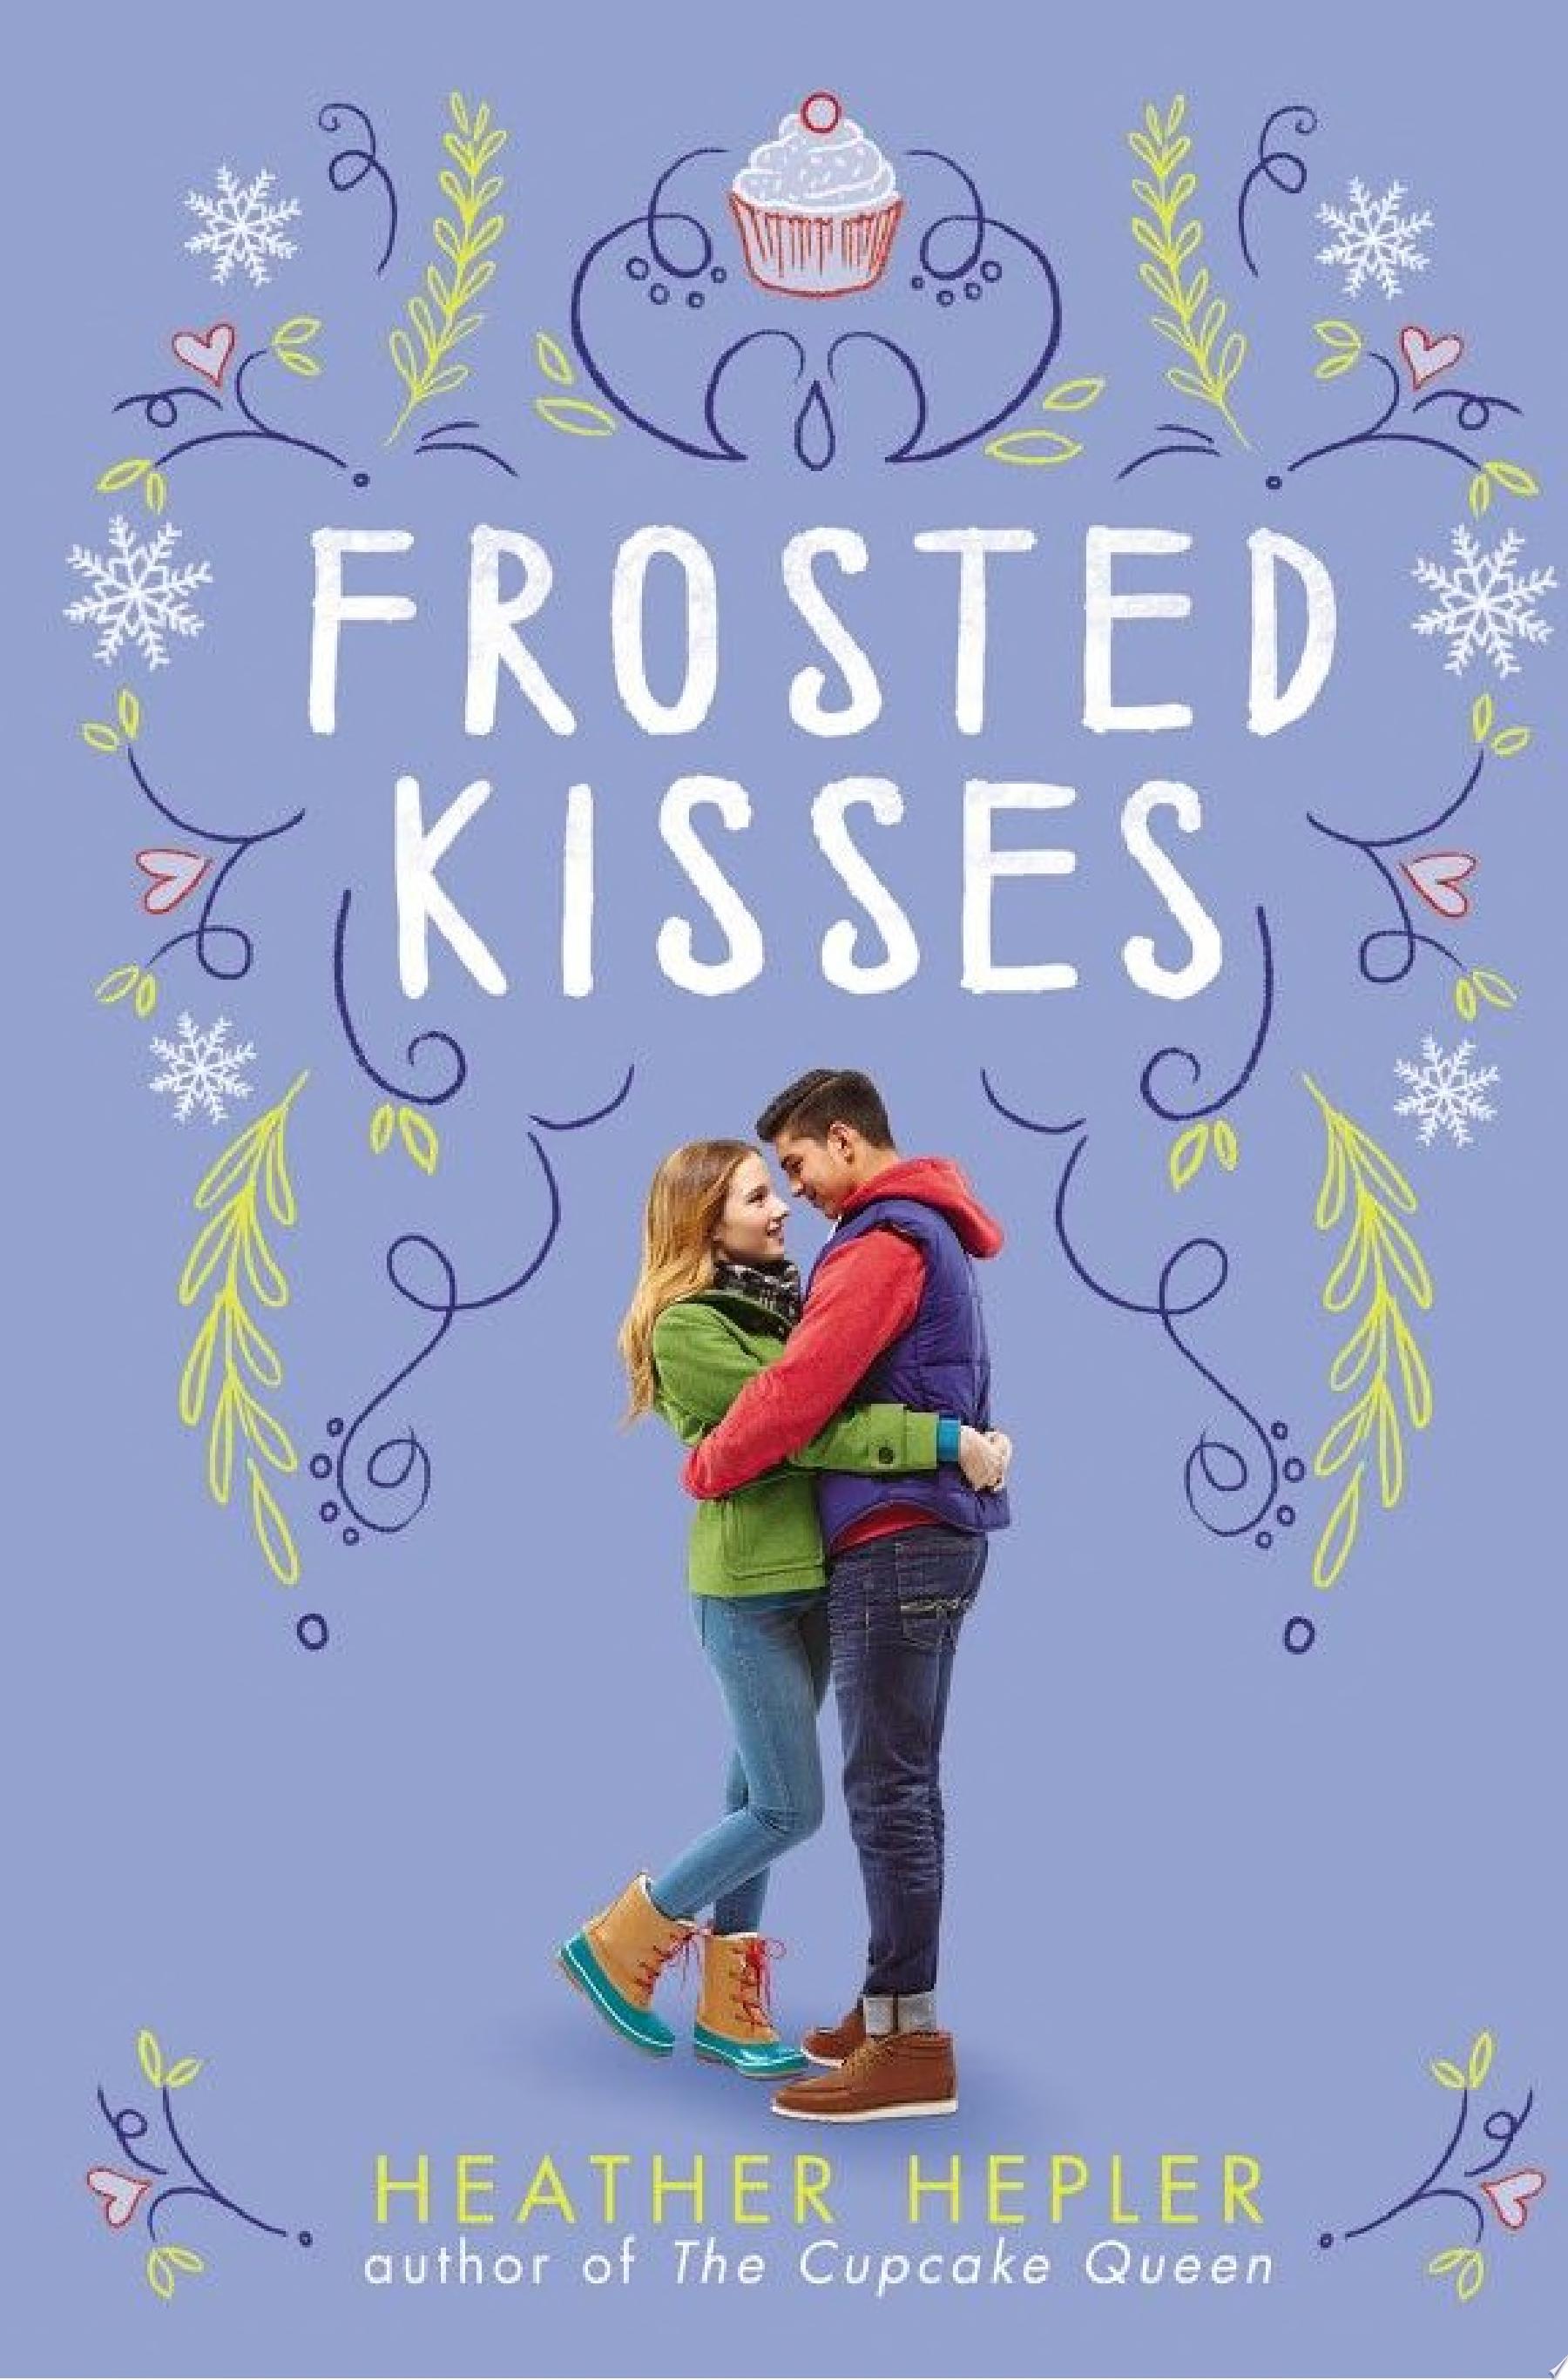 Image for "Frosted Kisses"